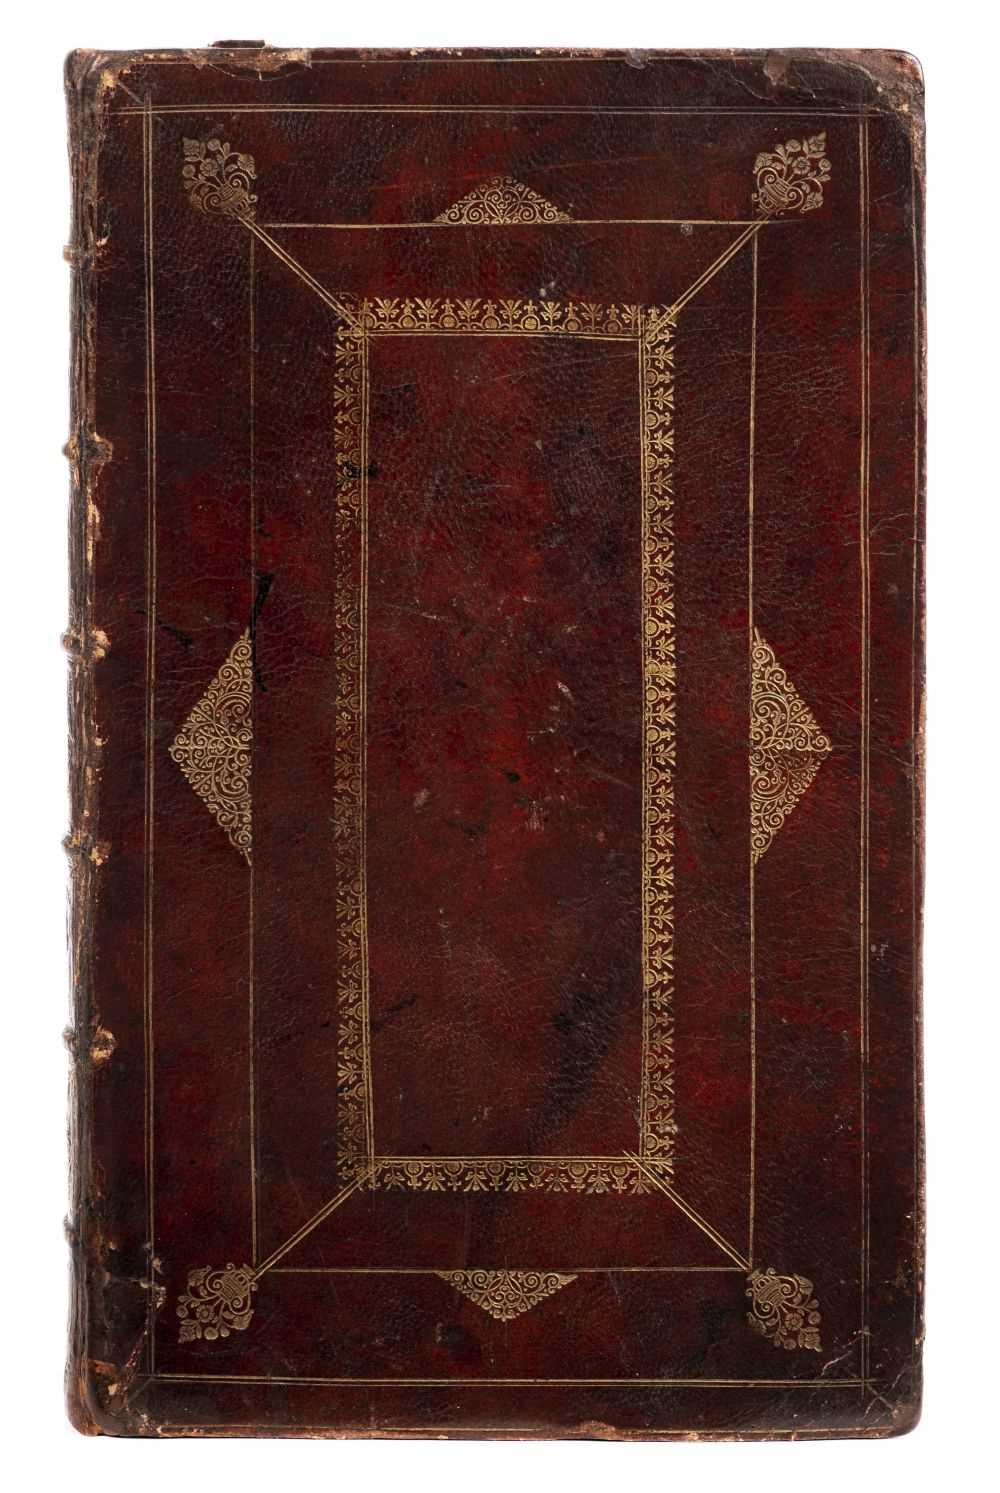 Lot 242 - Philips (Katherine). Poems, 1669, contemporary red goatskin gilt